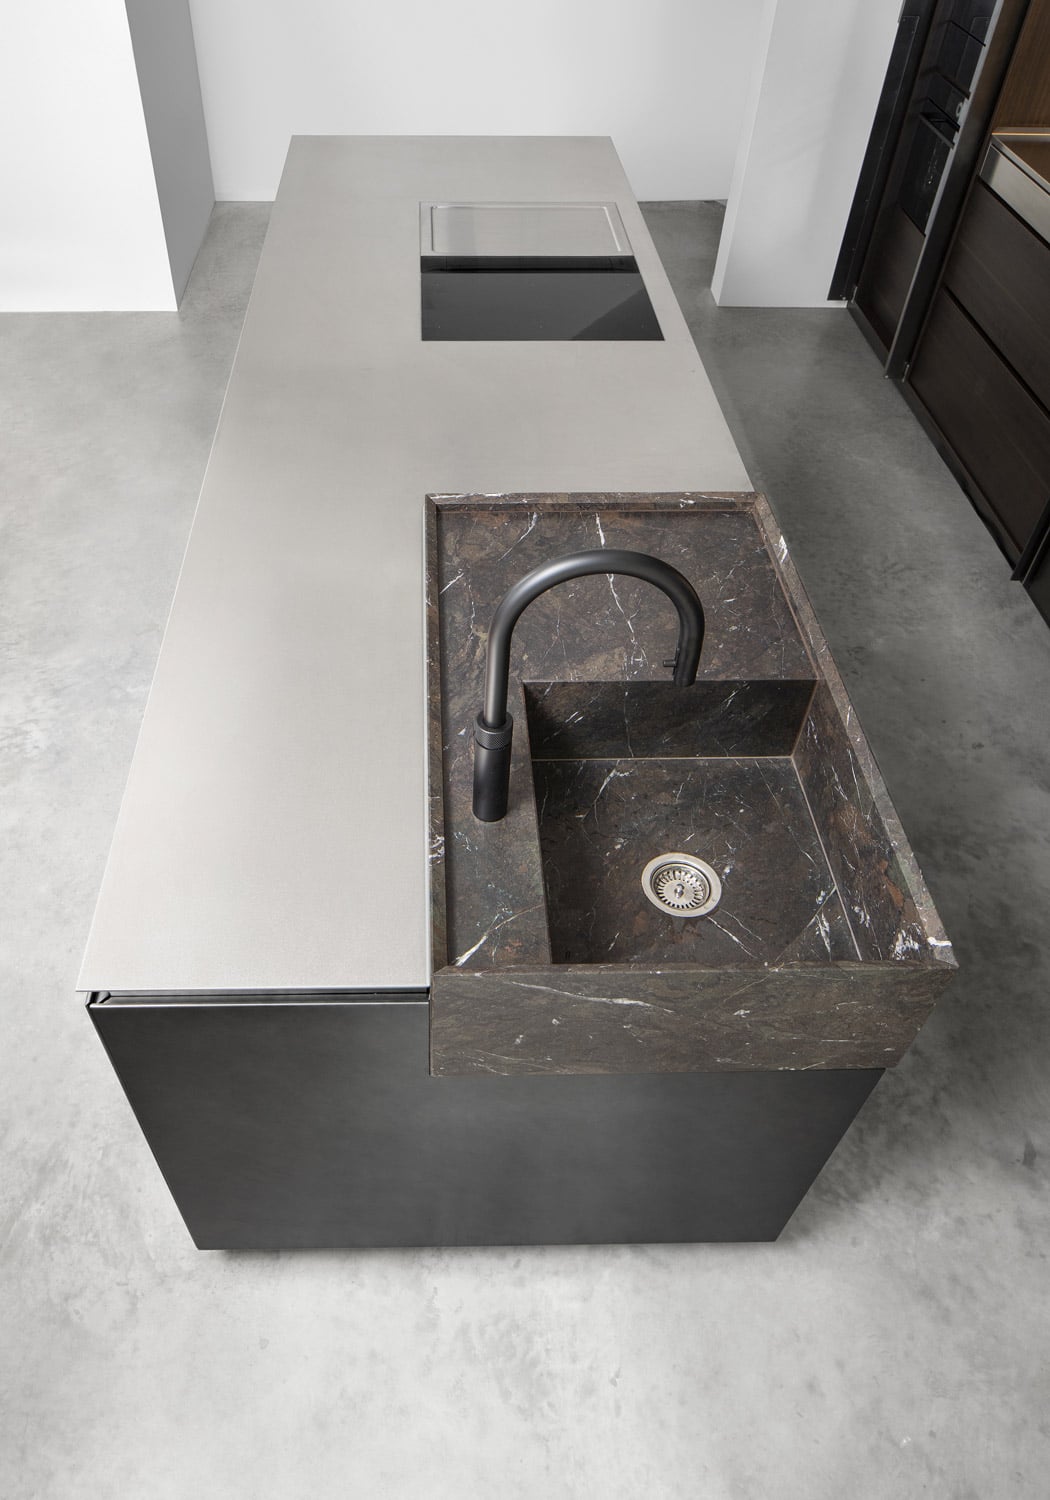 On the island, the hand-crafted single-block sink in Breccia Imperiale granite sits in contrast with the stainless steel countertop. 